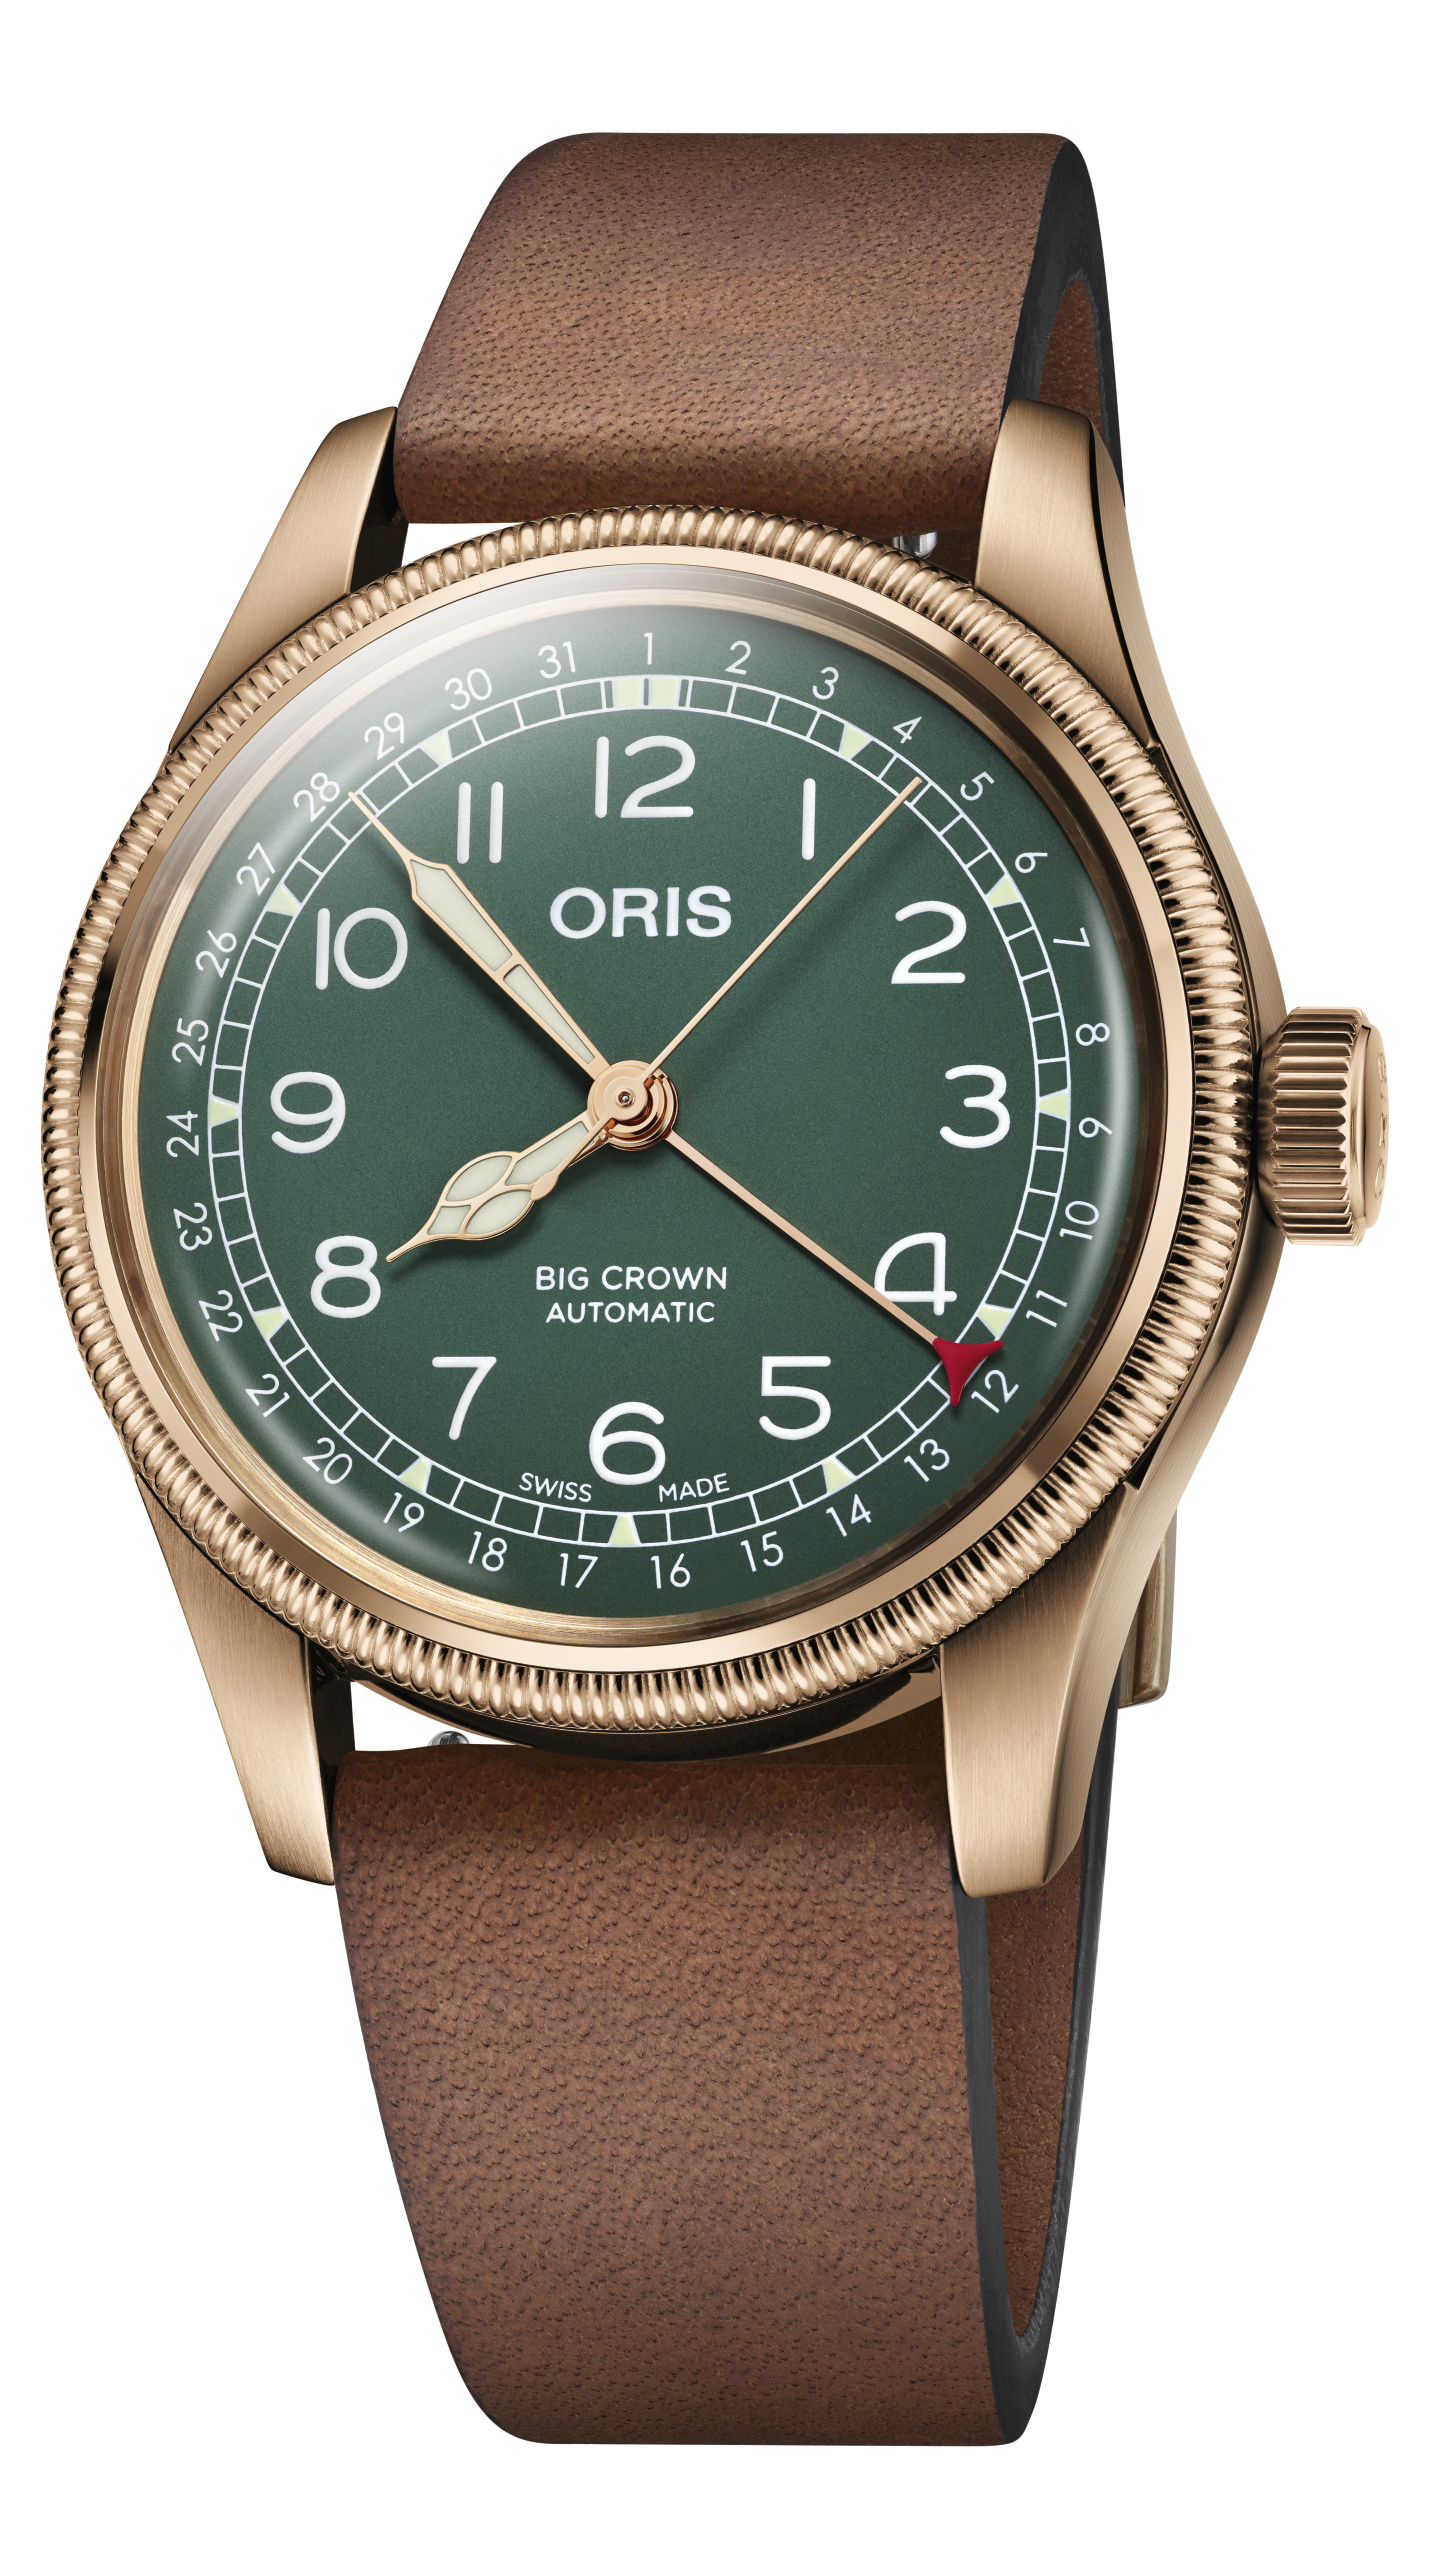 Big crown pointer date 80th anniversary edition